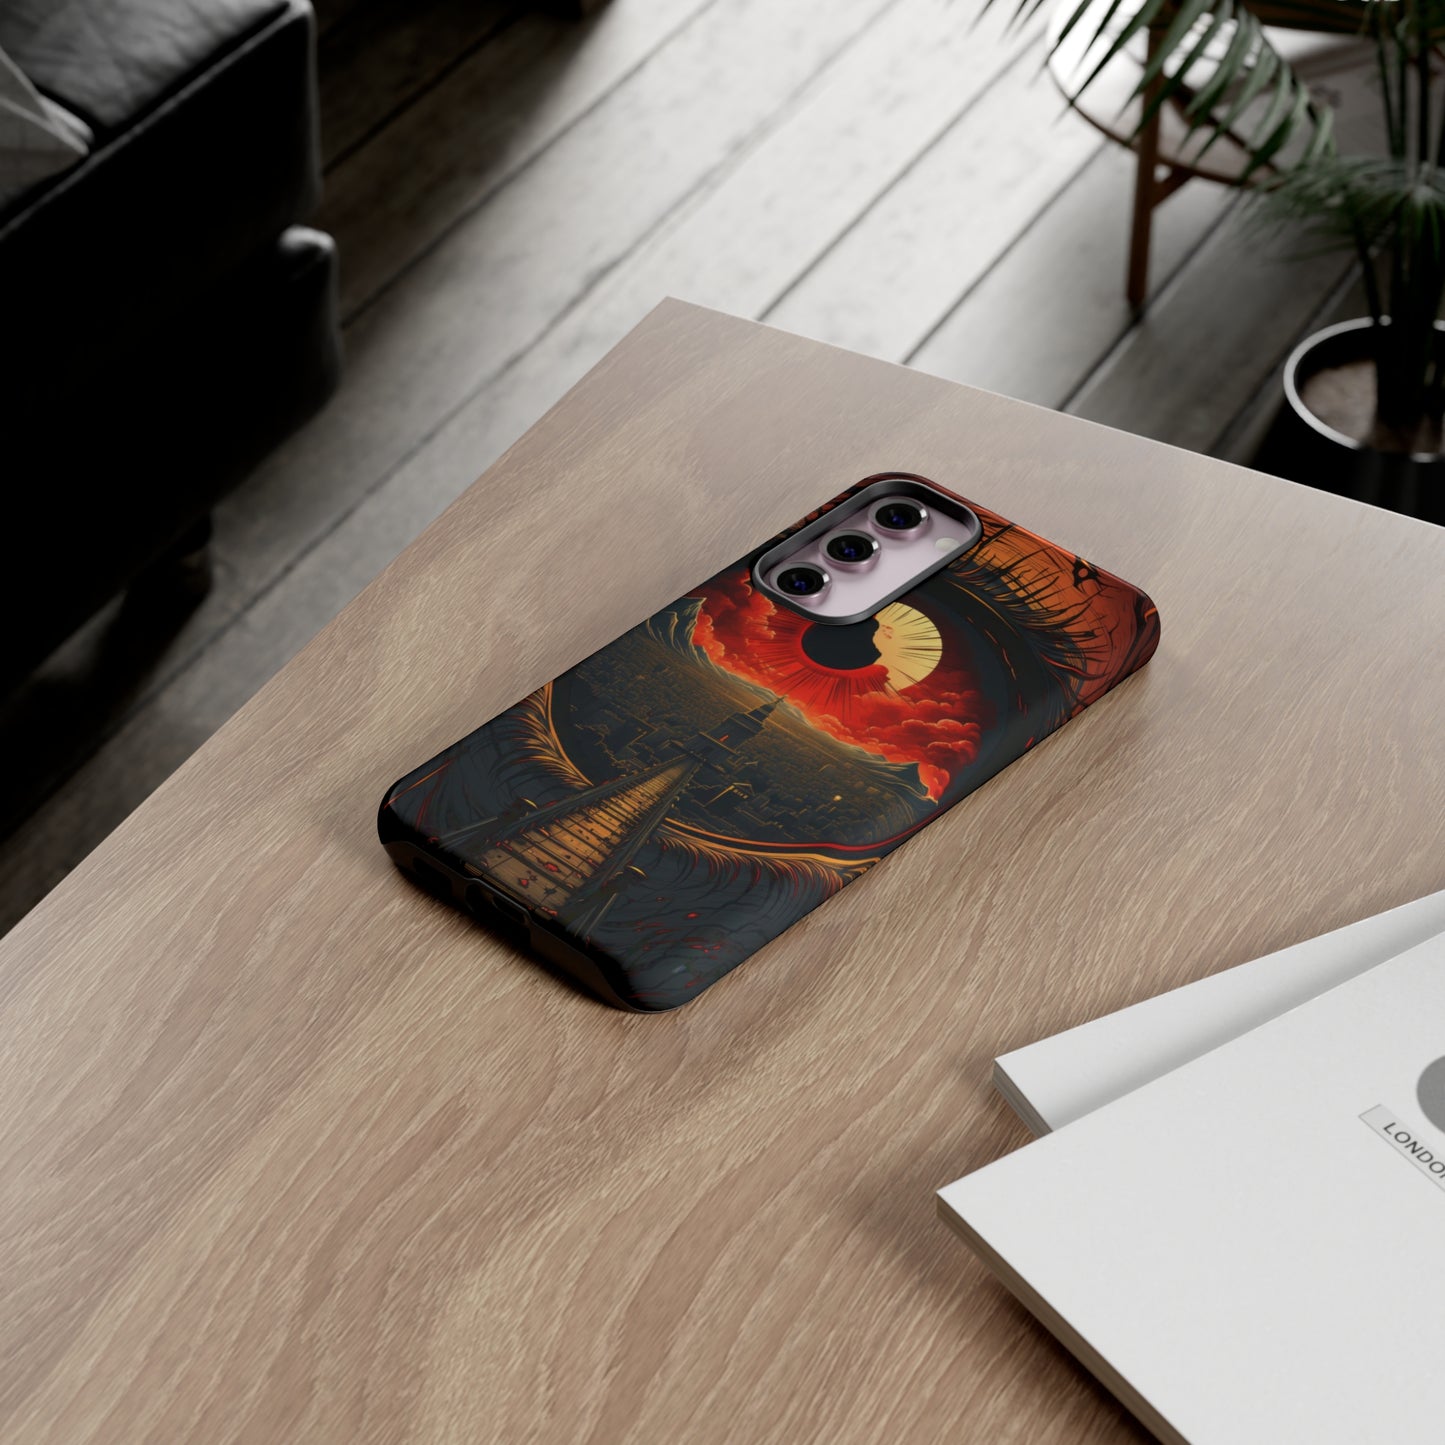 Red Eye Odyssey: Bridge to Enigma City Phone Case for iPhone, Samsung, Pixel